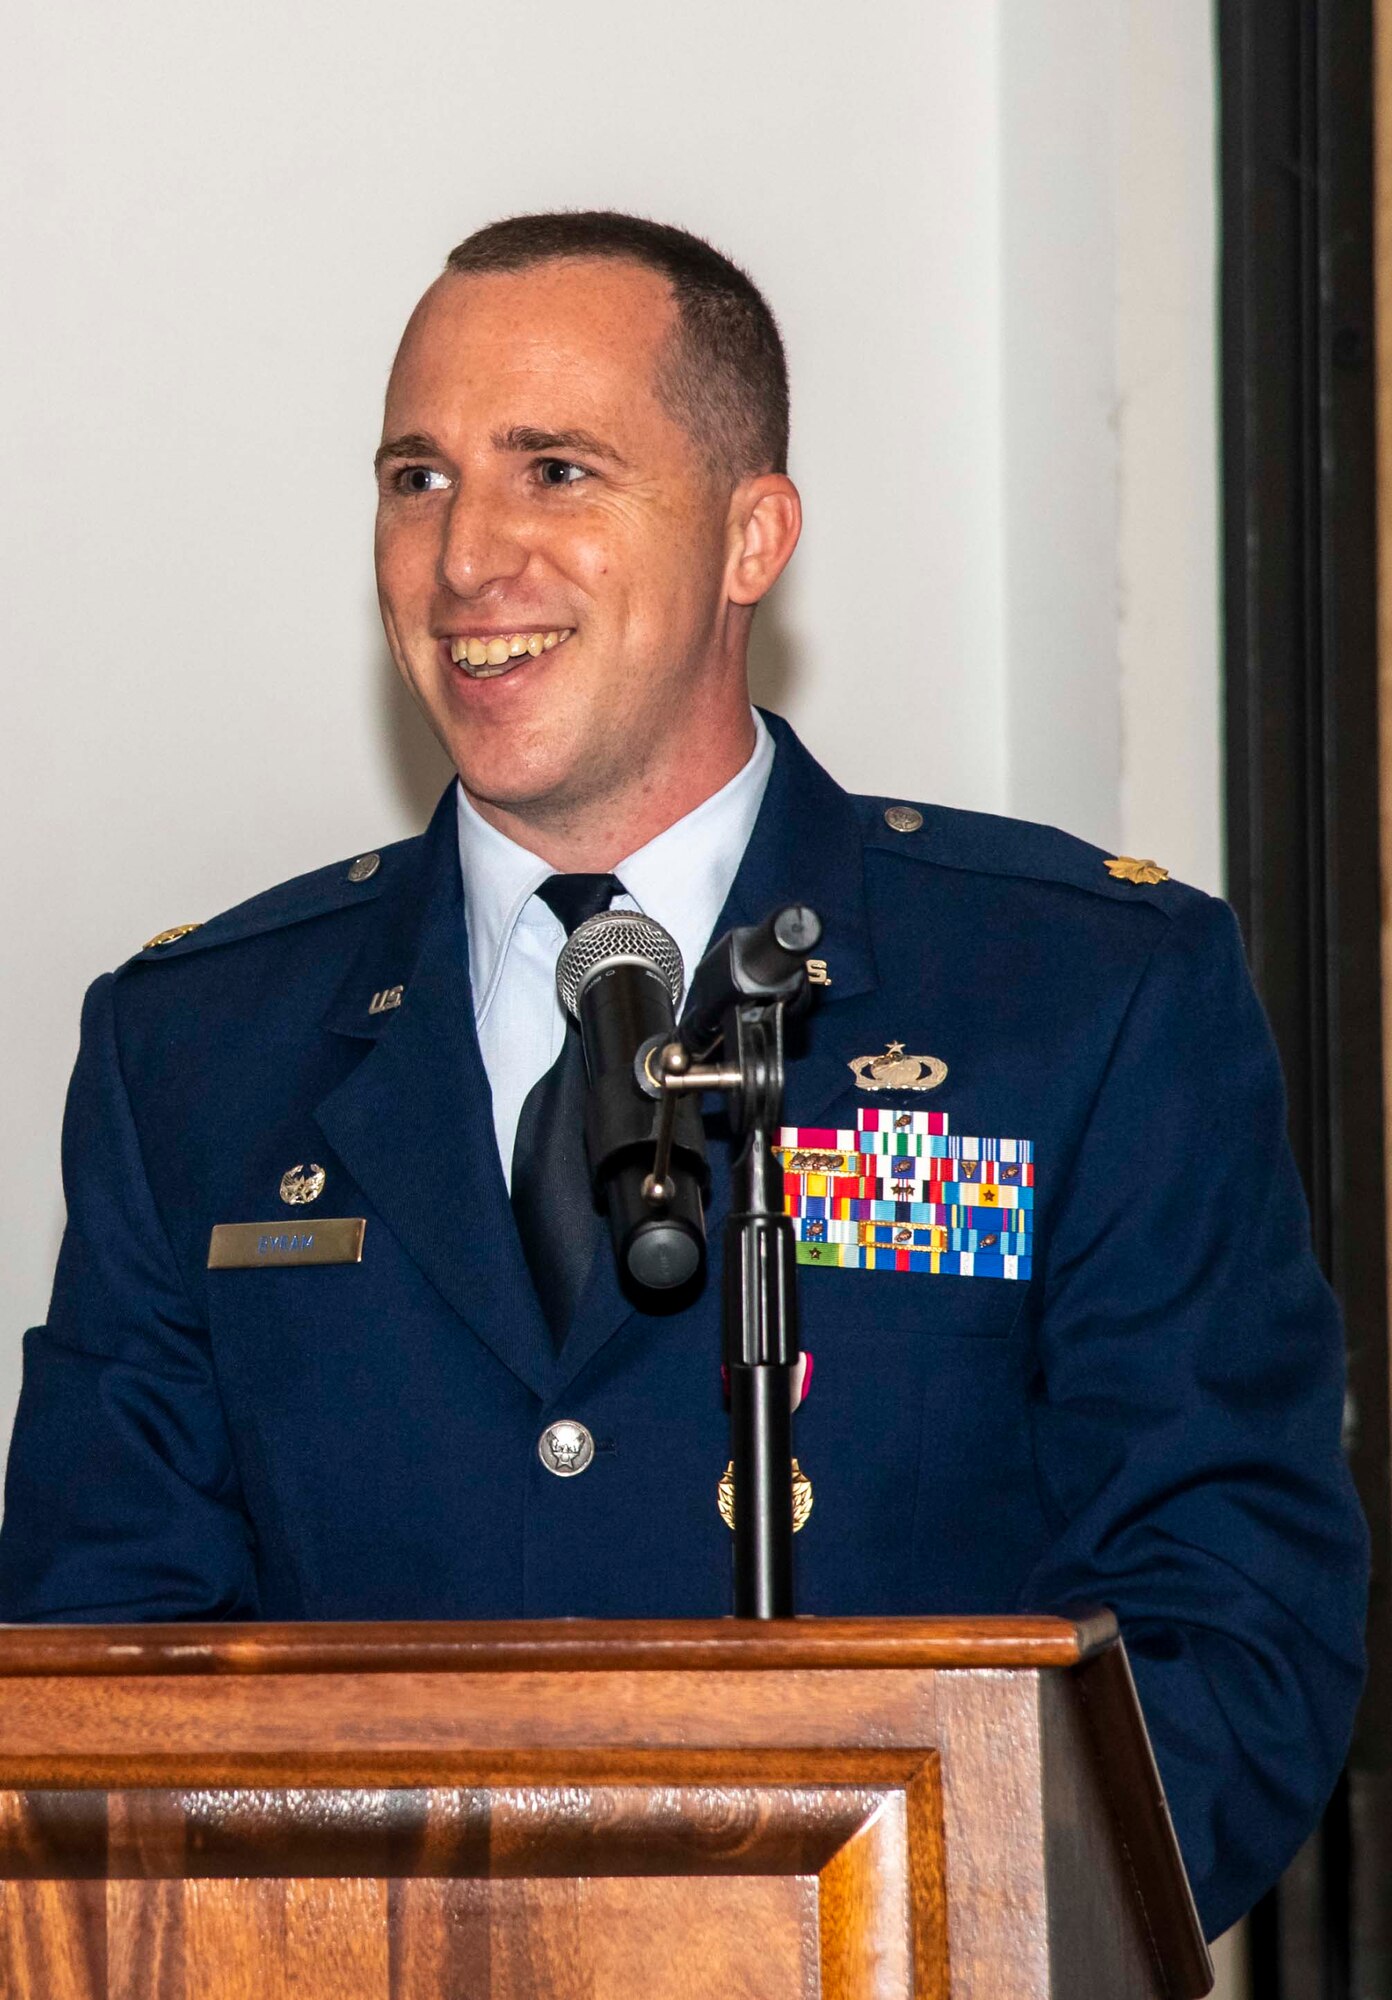 Maj. Kevin Byram, 436th Comptroller Squadron commander, speaks during a change of command ceremony on Dover Air Force Base, Delaware, June 28, 2021. The ceremony saw Byram relinquish command to Lt. Col. Gretchen Lewis. (U.S. Air Force photo by Airman 1st Class Stephani Barge)